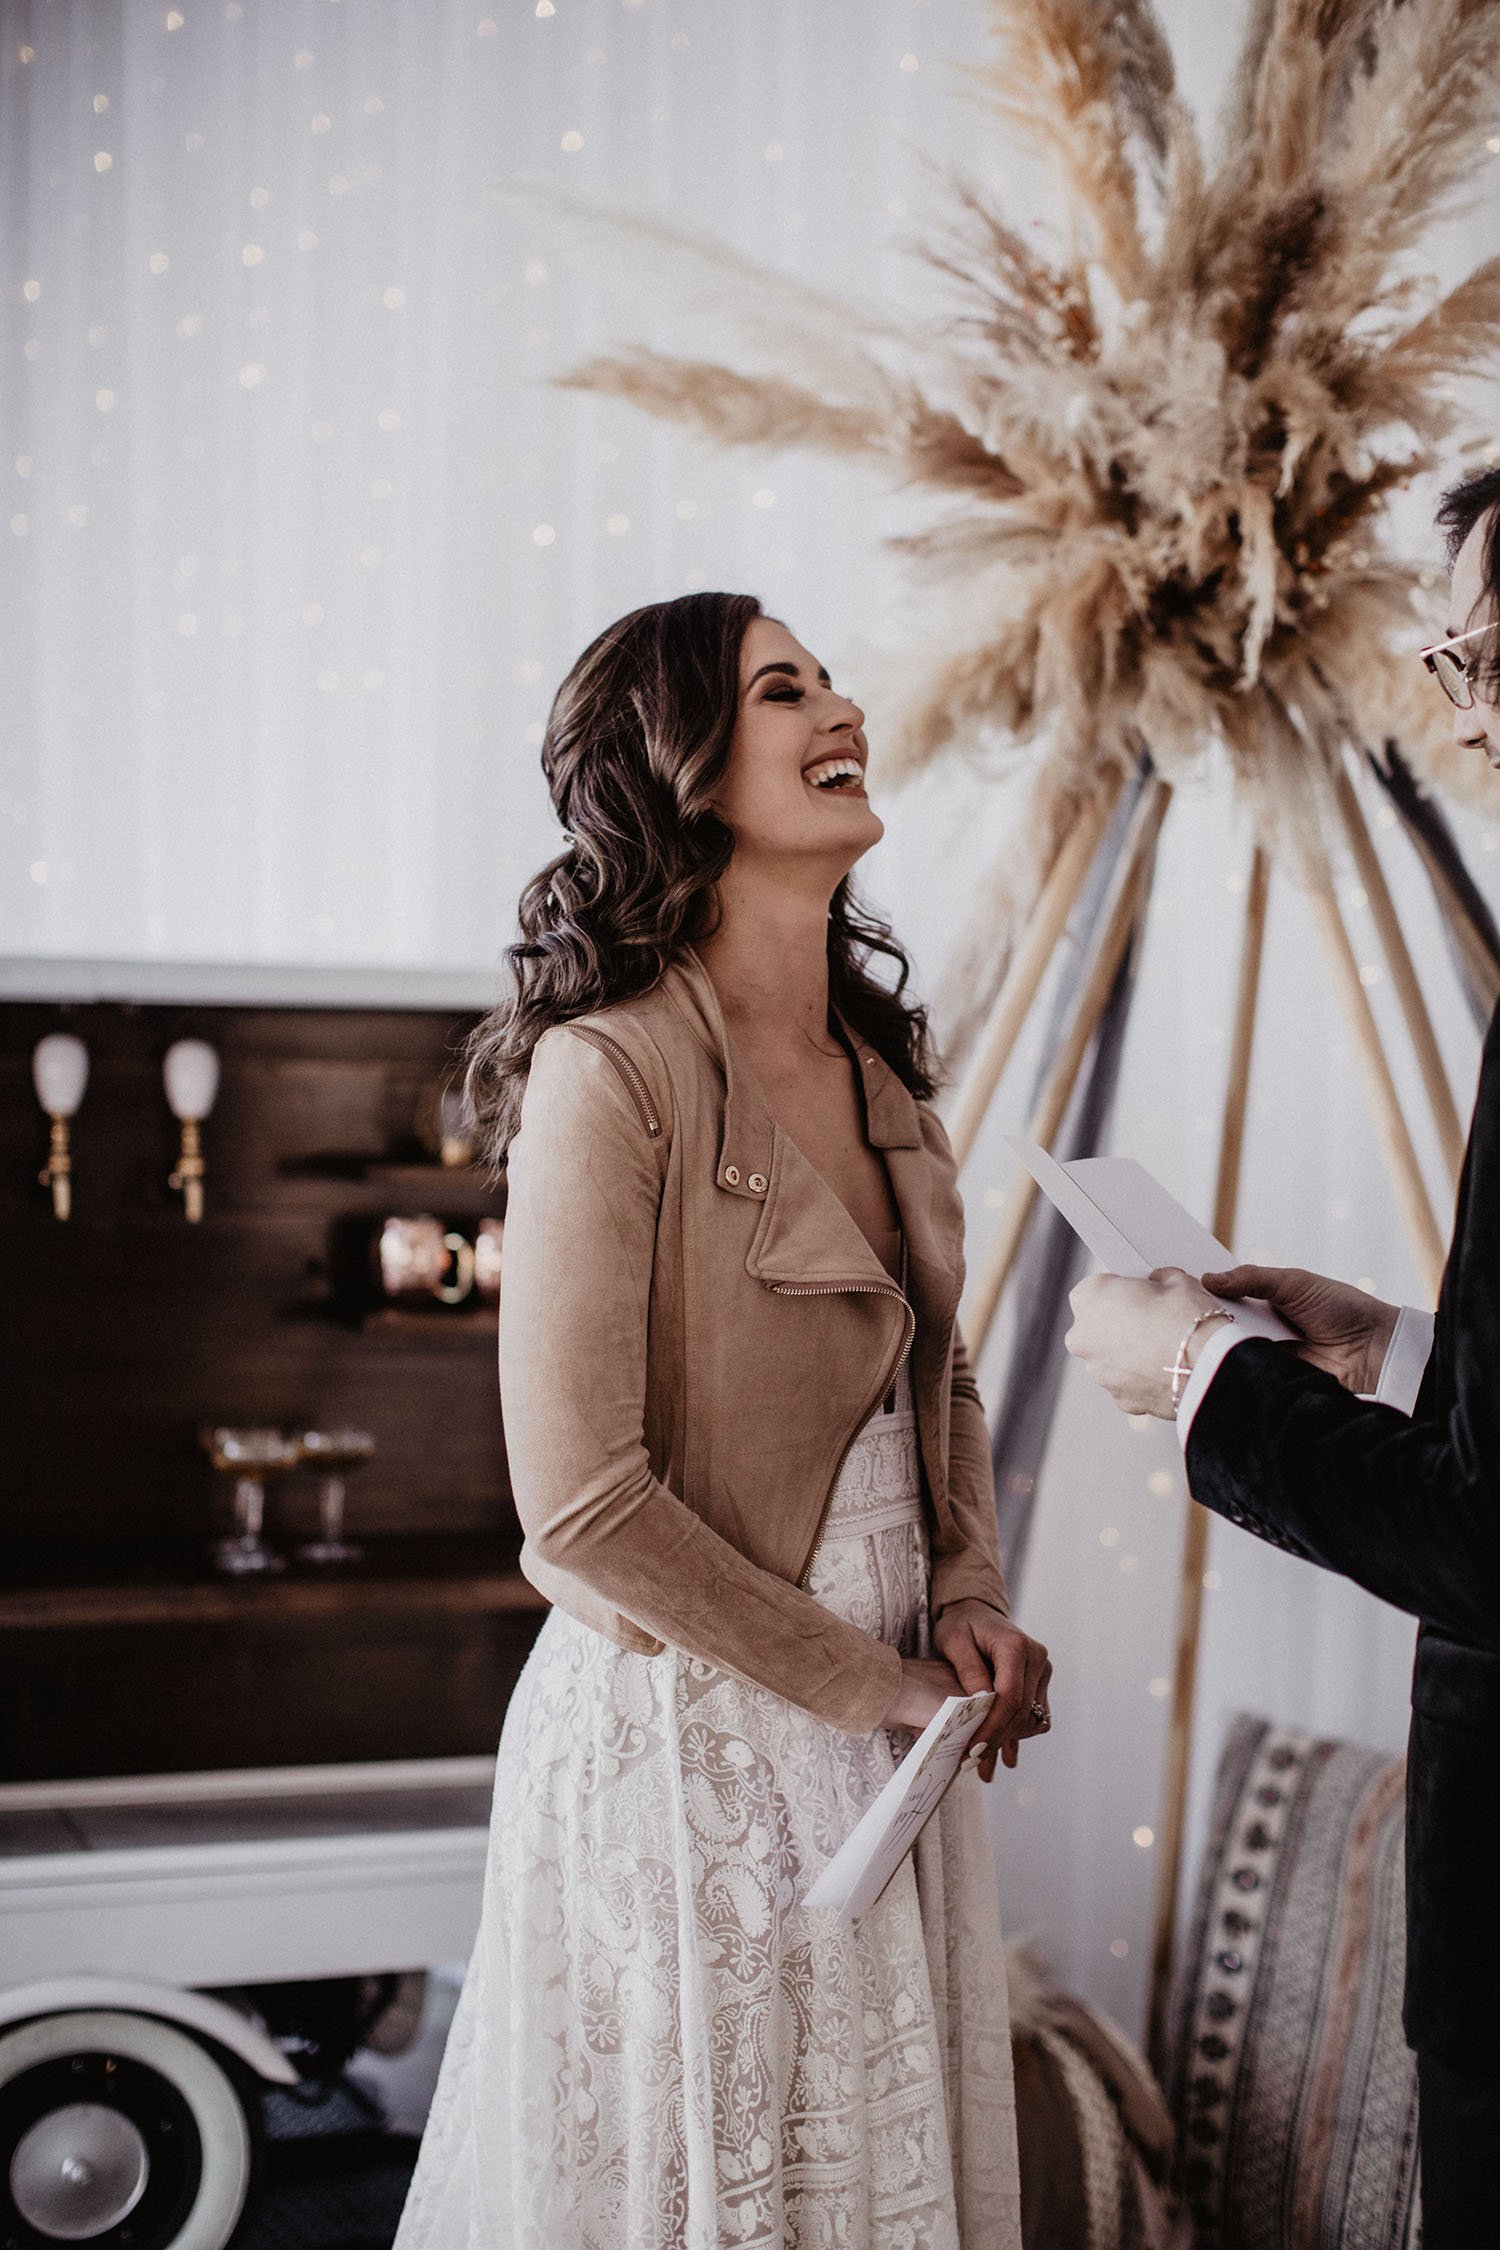  A bride wearing Rue de Seine Kyara, which is a bold lace wedding dress with a thick banded waist and deep-v neckline. She is wearing a brown suede leather jacket and her hair is tilted back laughing. Her hair is dark brown and styled half up in soft